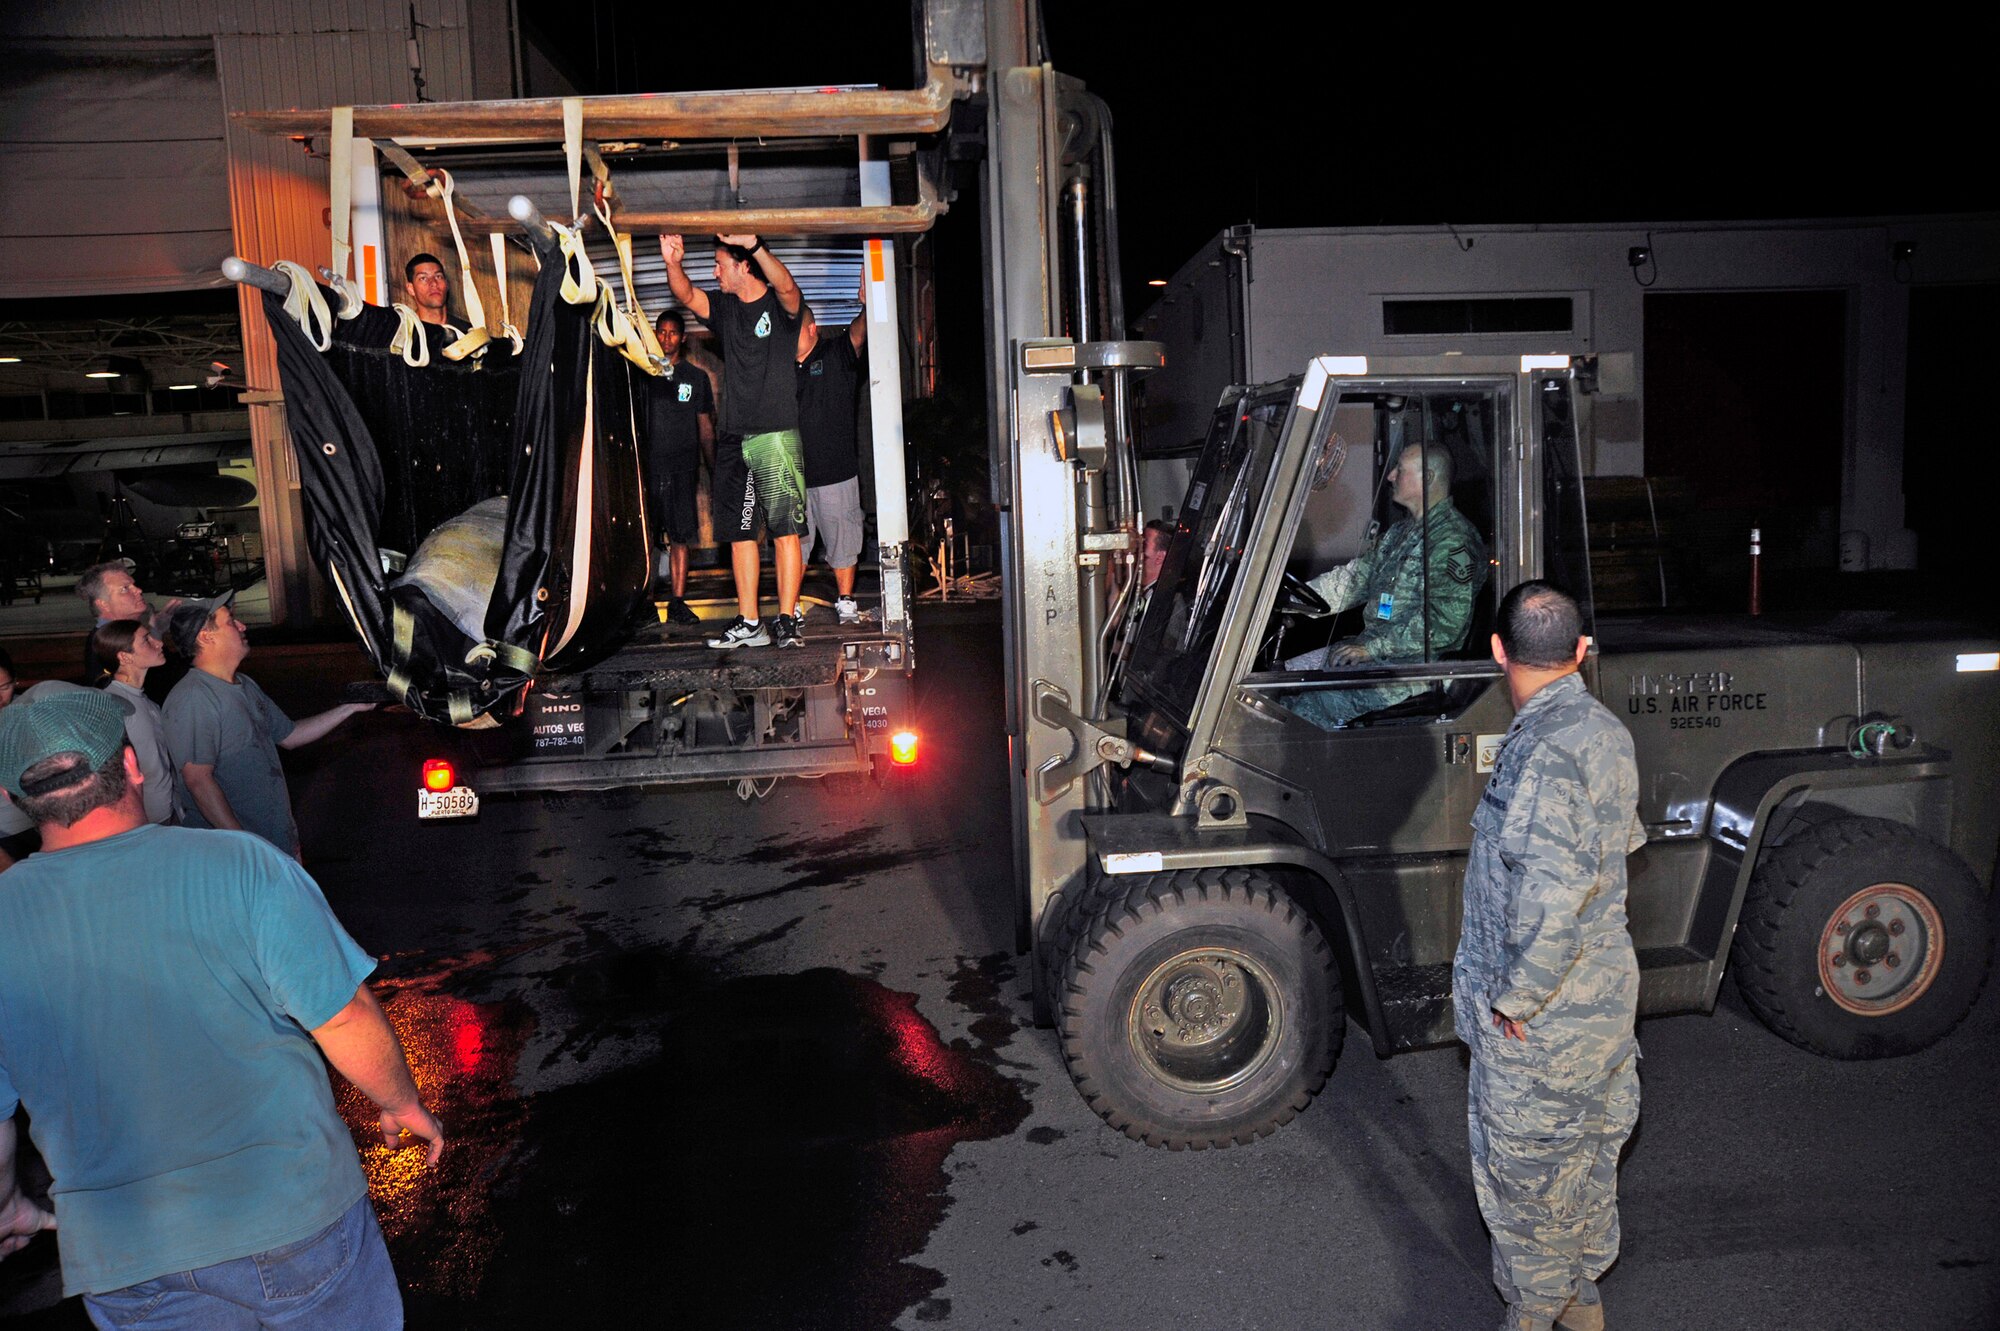 An Airman with the Puerto Rico Air National Guard in San Juan, Puerto Rico, operates a forklift holding a wounded manatee while volunteers assist in transferring it into a vehicle Dec 9, 2010.  The manatee was transported from MacDill Air Force Base, Fla., to San Juan on a C-130 Hercules flown by an aircrew from the Puerto Rico Air Guard’s 156th Airlift Wing. (U.S. Air Force photo/Staff Sgt. Angela Ruiz)